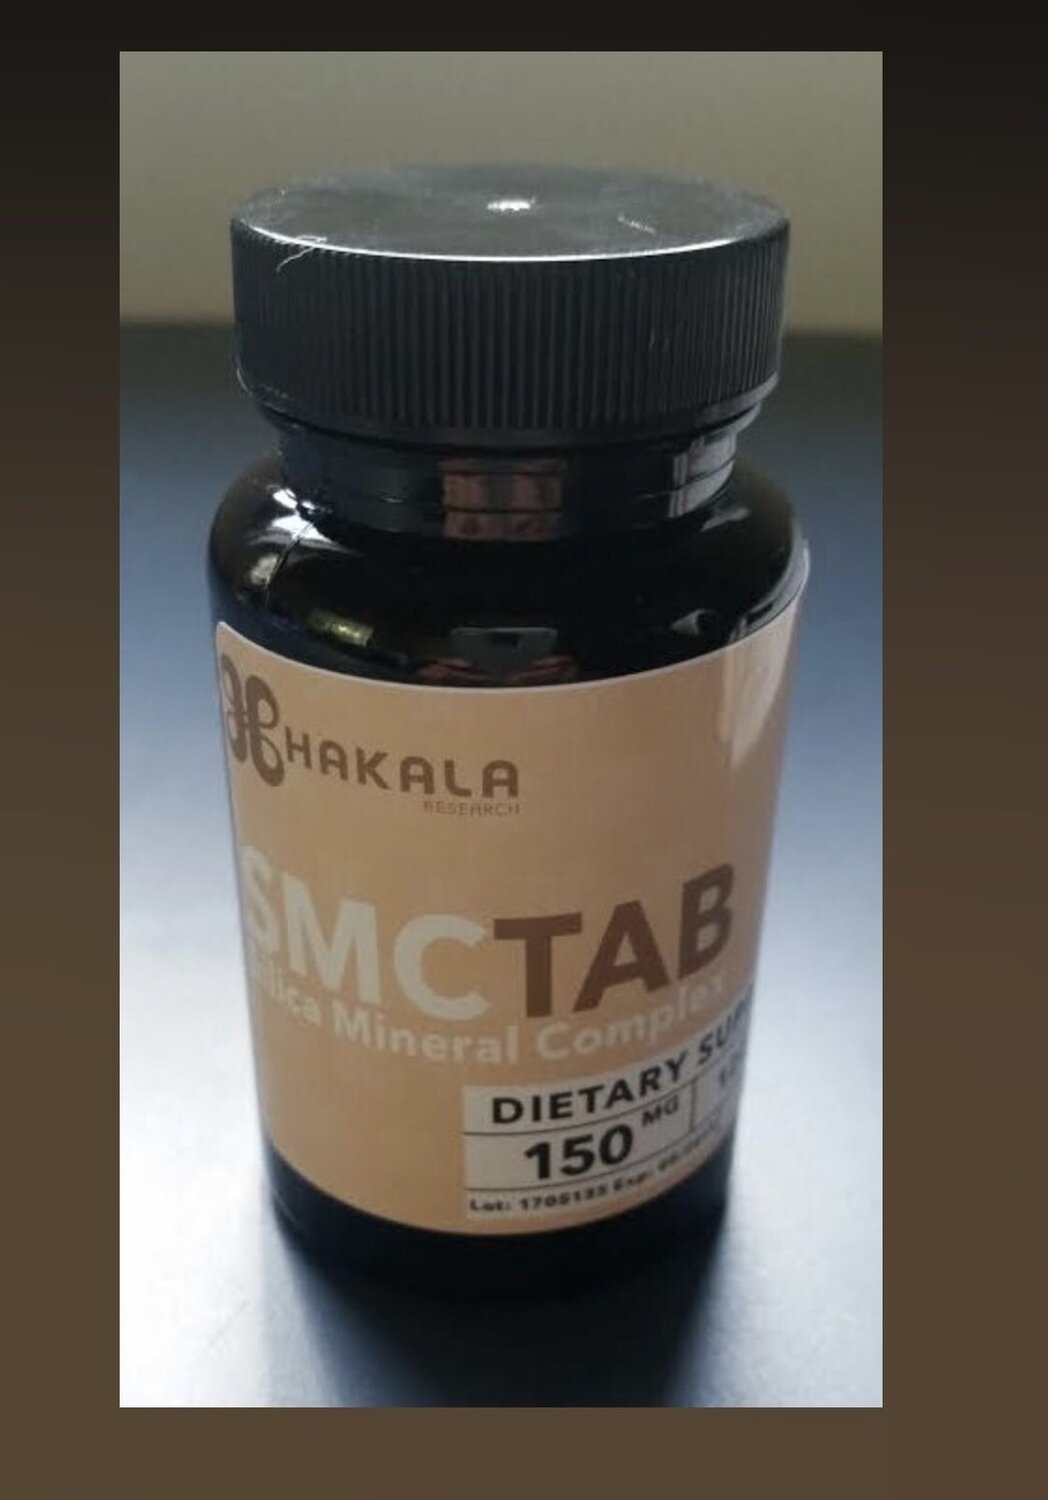 SMCTab-Silica Mineral Complex 150mg-120 Tablets